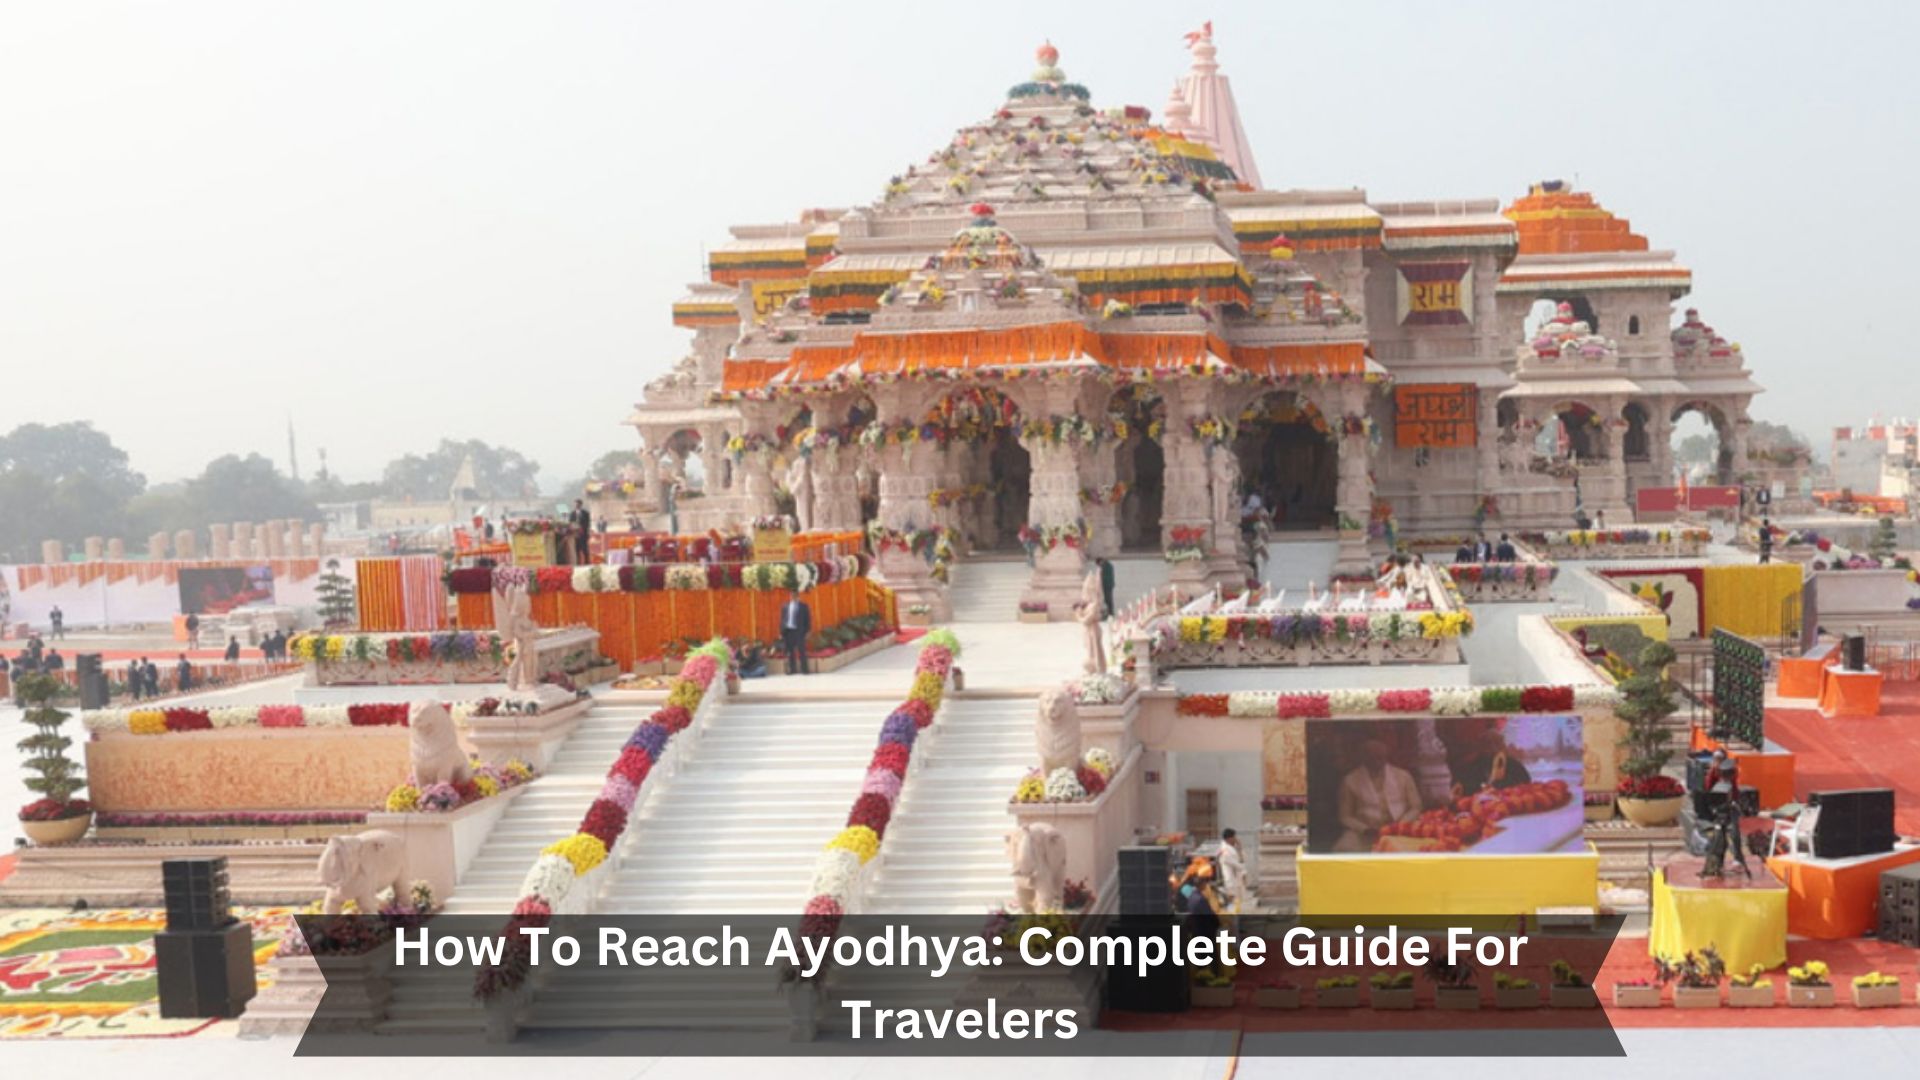 How-To-Reach-Ayodhya-Complete-Guide-For-Travelers